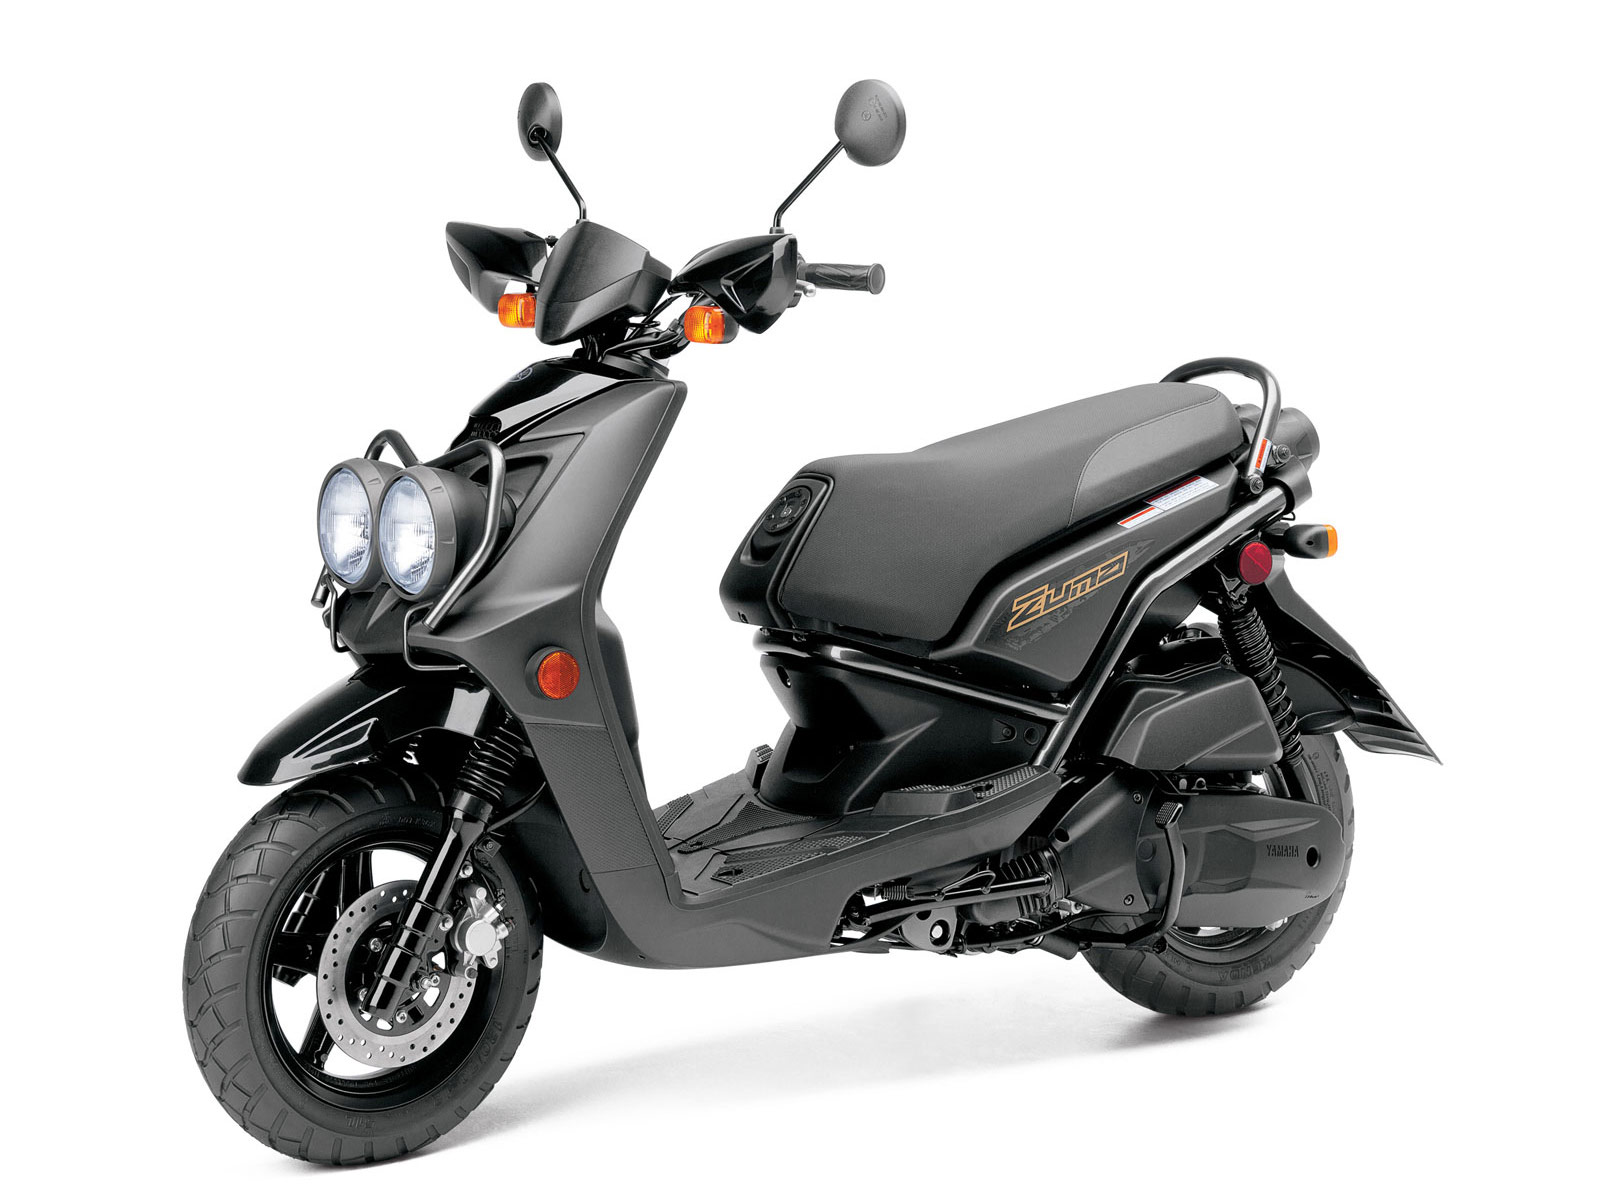 Insurance information. 2013 Yamaha Zuma 125 Scooter pictures, specs.